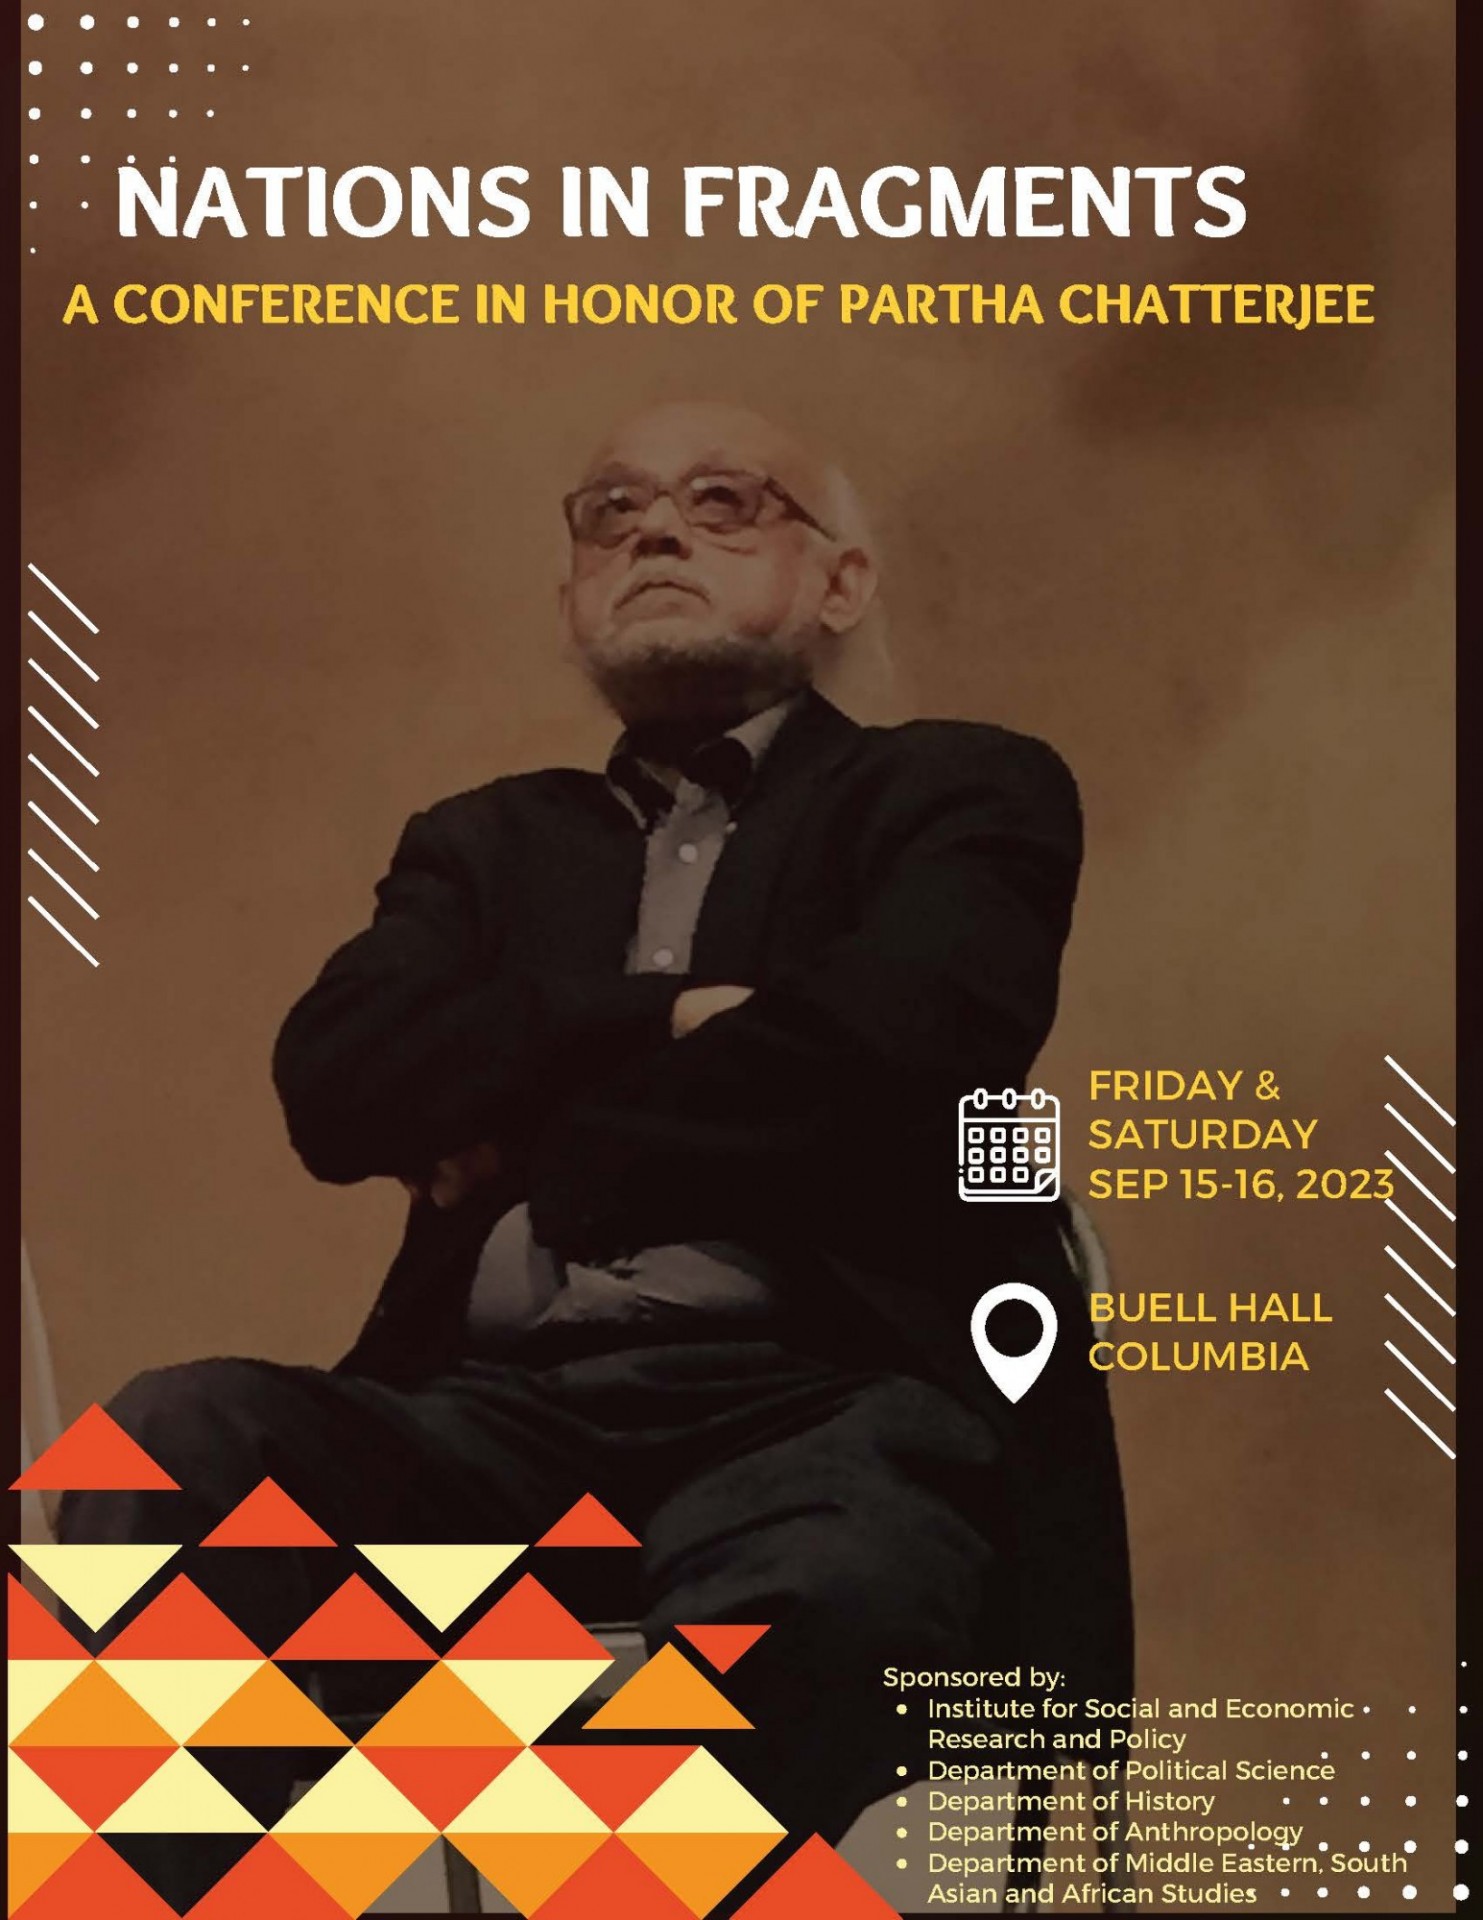 Poster announcing conference, "Nations in Fragments: A Conference in Honor of Partha Chatterjee'